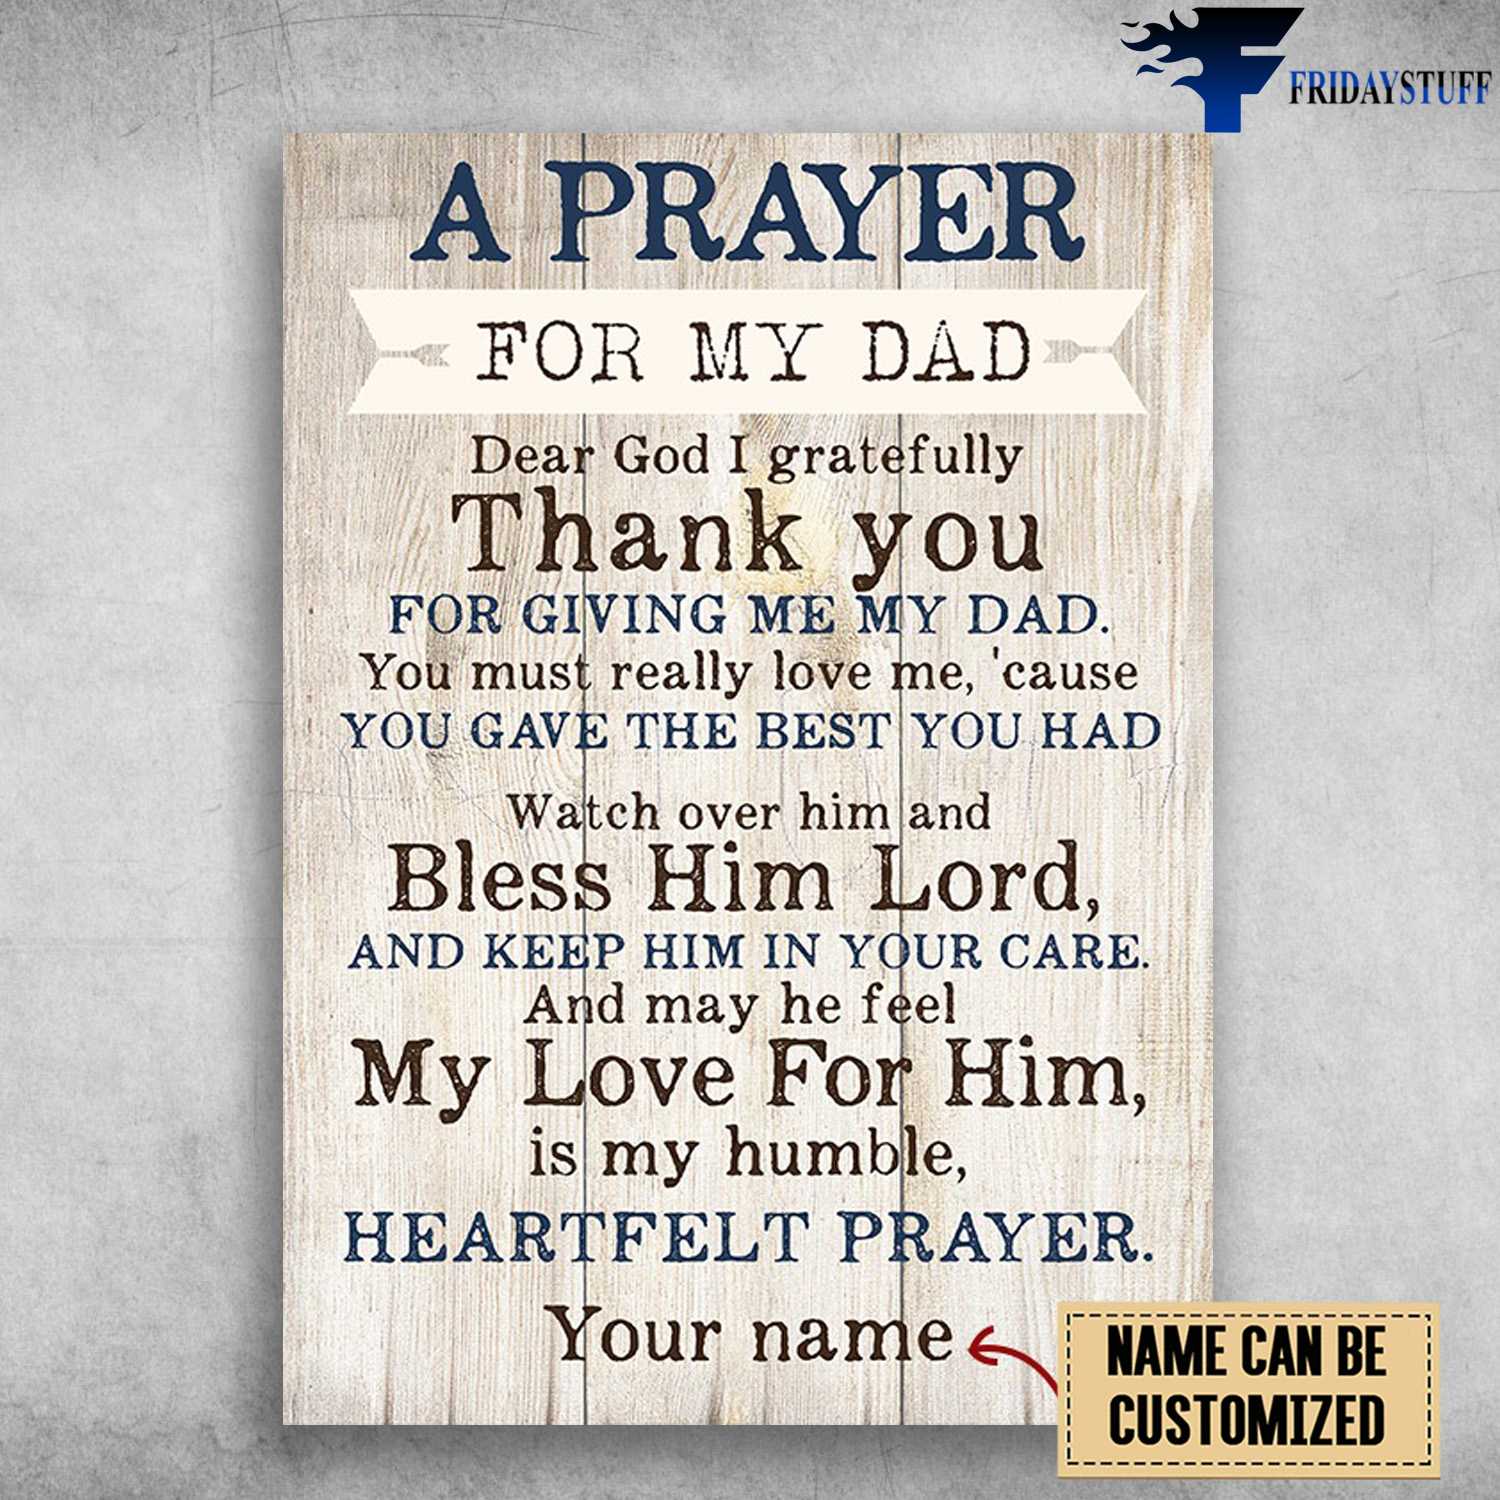 A Prayer For My Dad, Dear God I Greatefully, Thank You, For Giving Me My Dad, You Must Really Love Me, Cause You Gave The Best You Had, Watch Over Him And Bless Him Lord